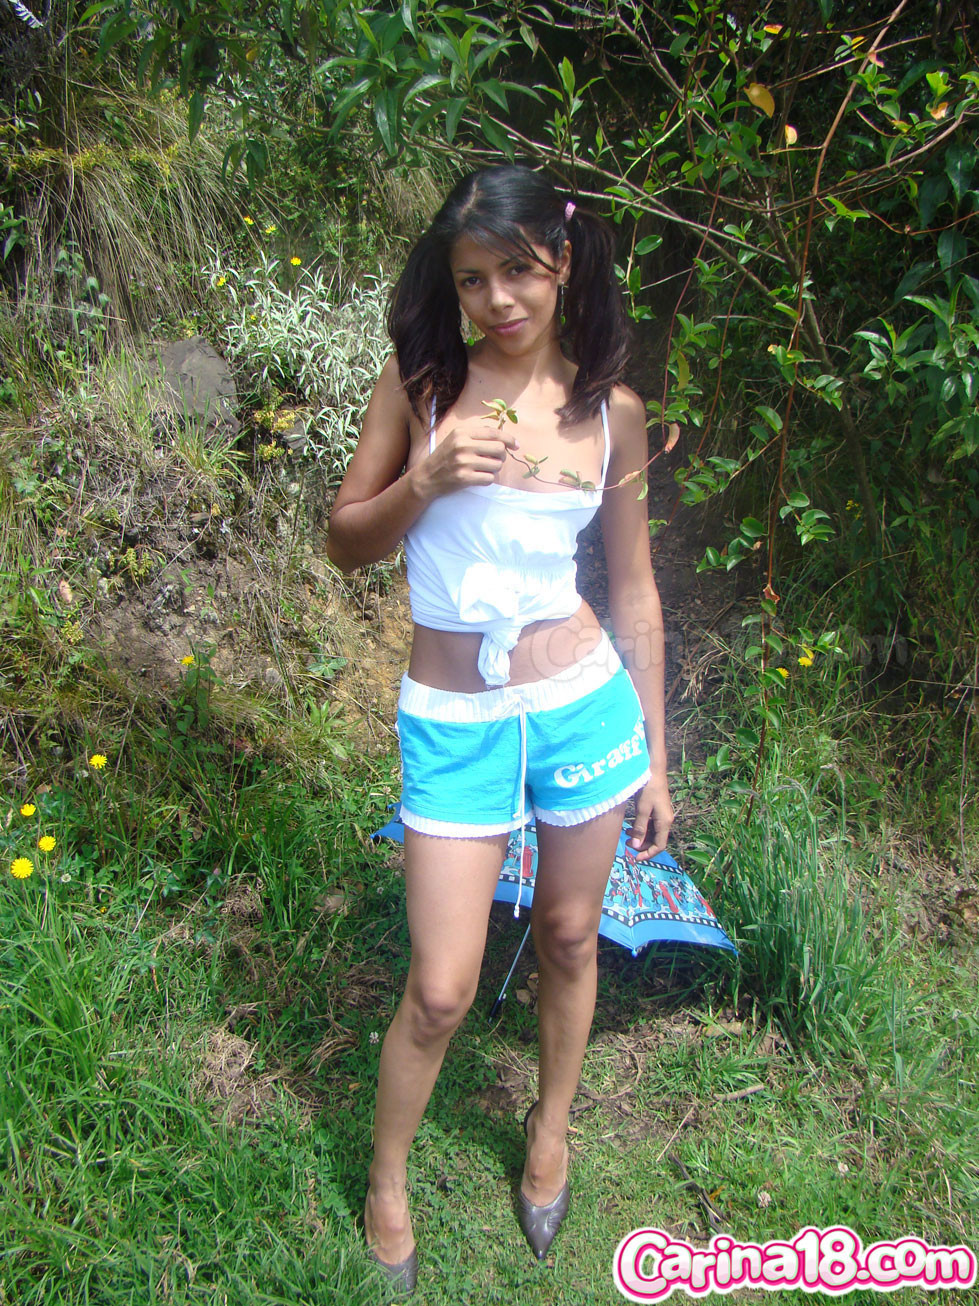 Want to have a sweet fantasy date with latin teen Carina18Click here #68216107